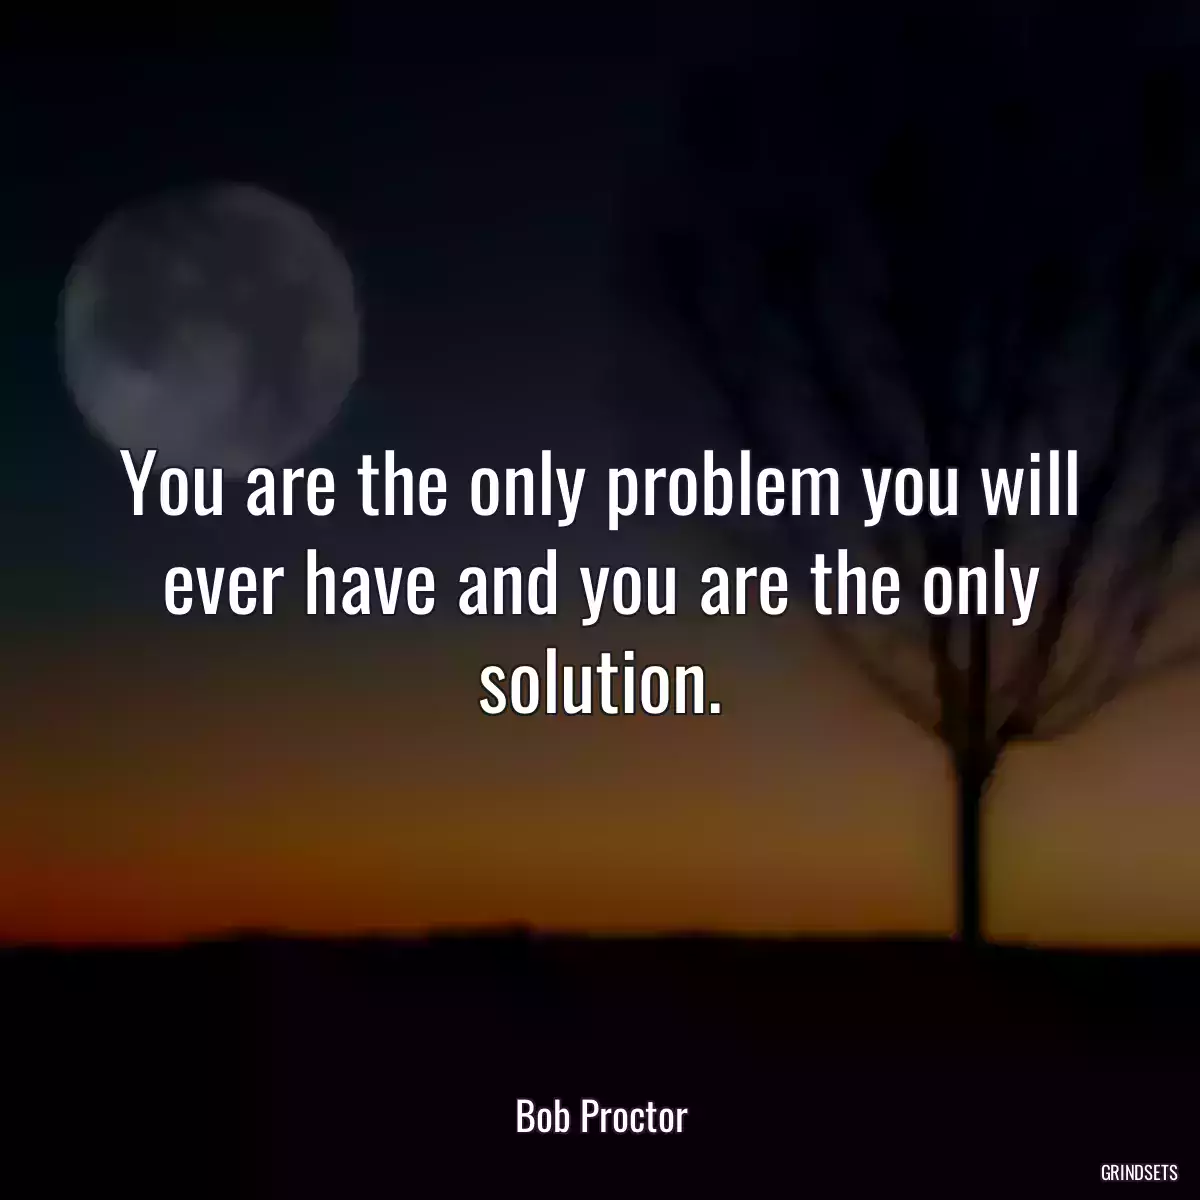 You are the only problem you will ever have and you are the only solution.